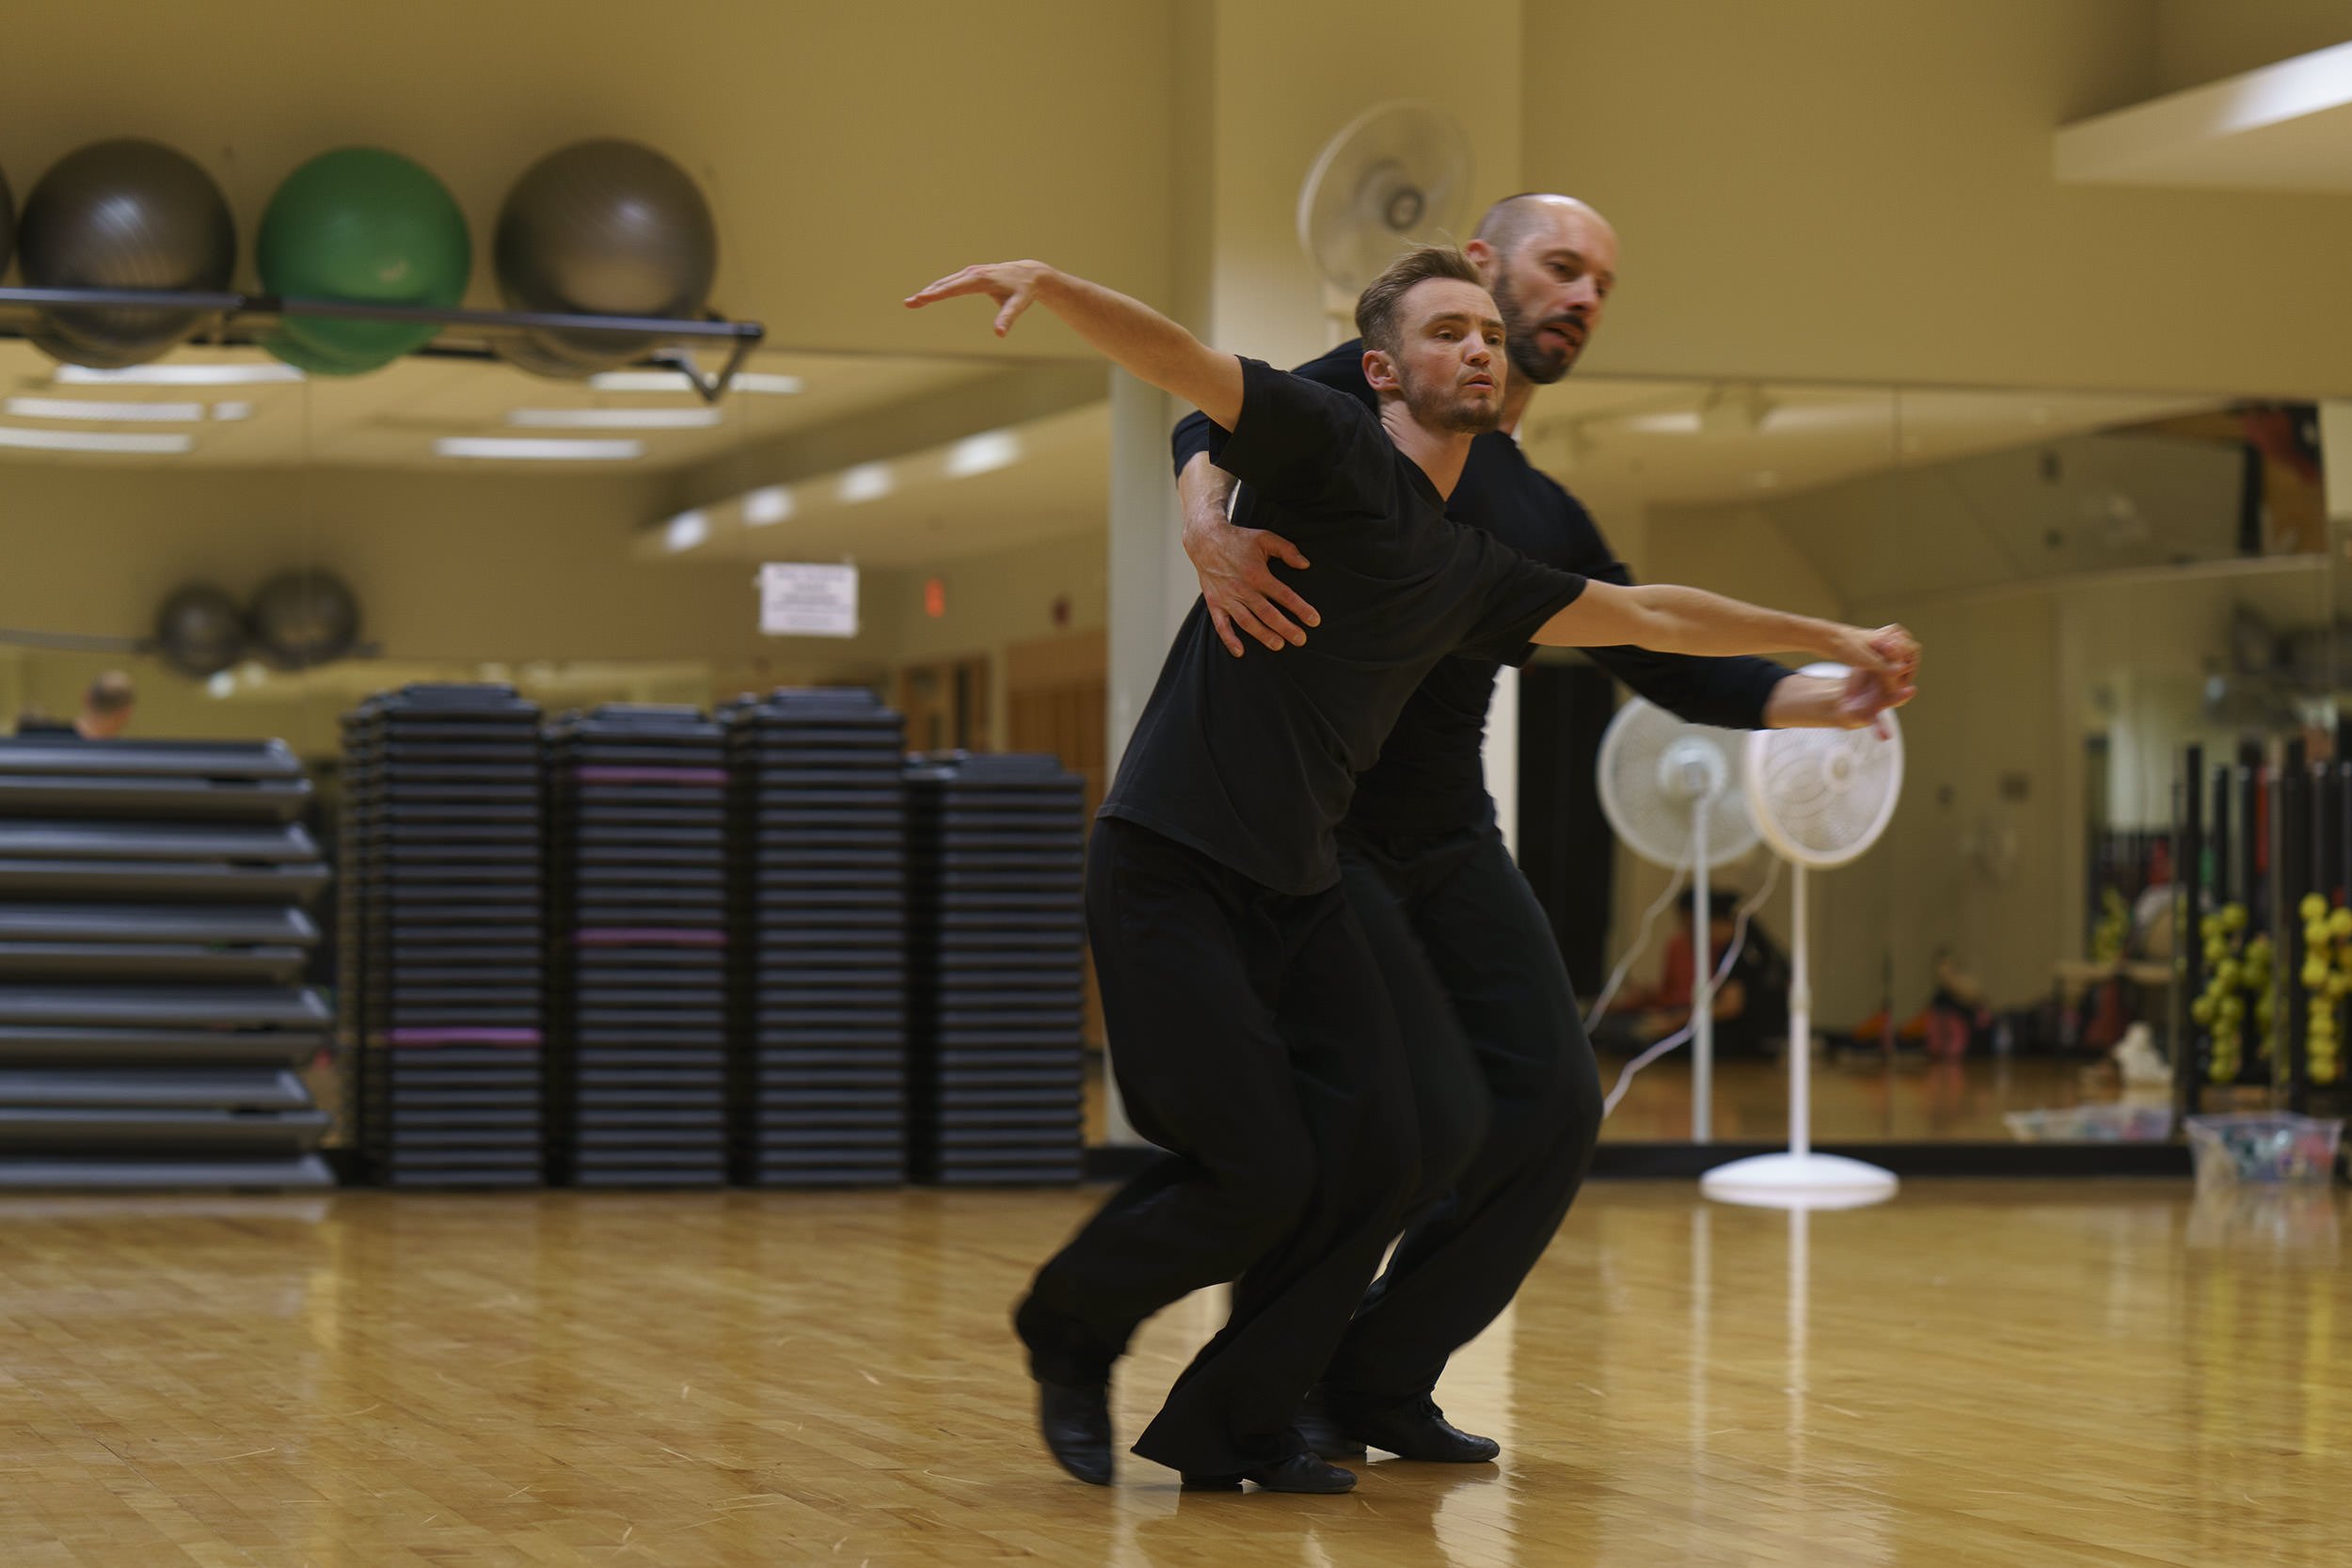  After Kato transitioned to male in 2016, the couple continued their partnership but were not allowed to compete in mainstream National Dance Council of America (NDCA) events as a same-sex duo.  